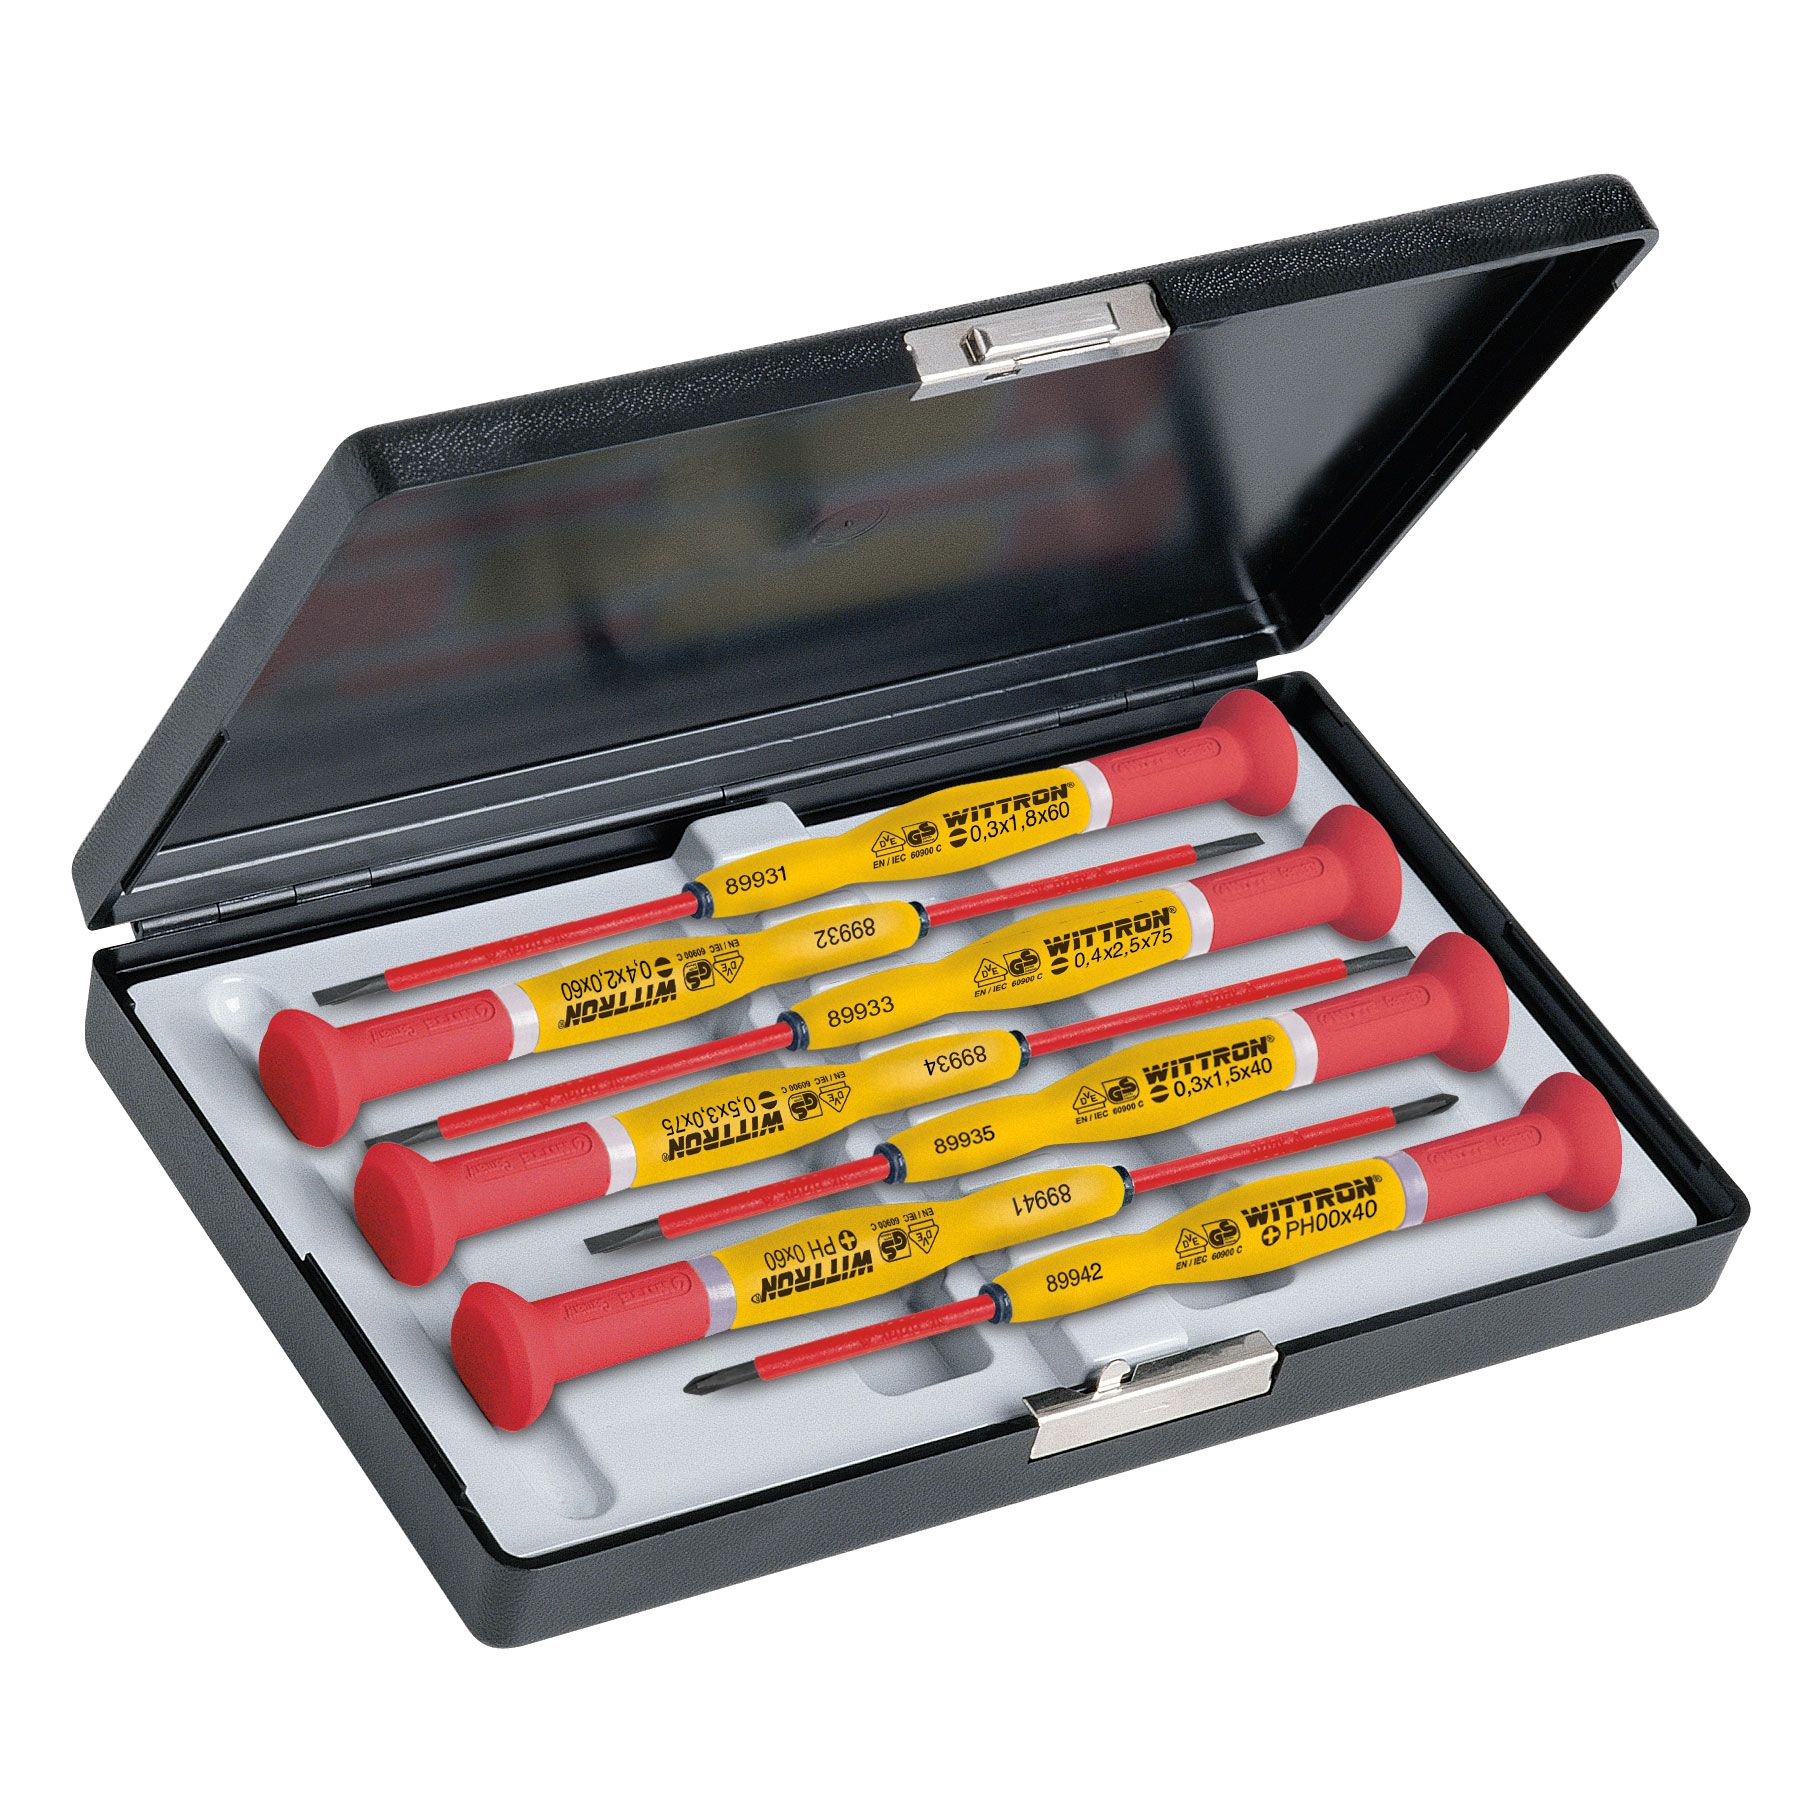 Witte 7 Piece Insulated Precision Slotted and Phillips Screwdriver Set in Plastic Case